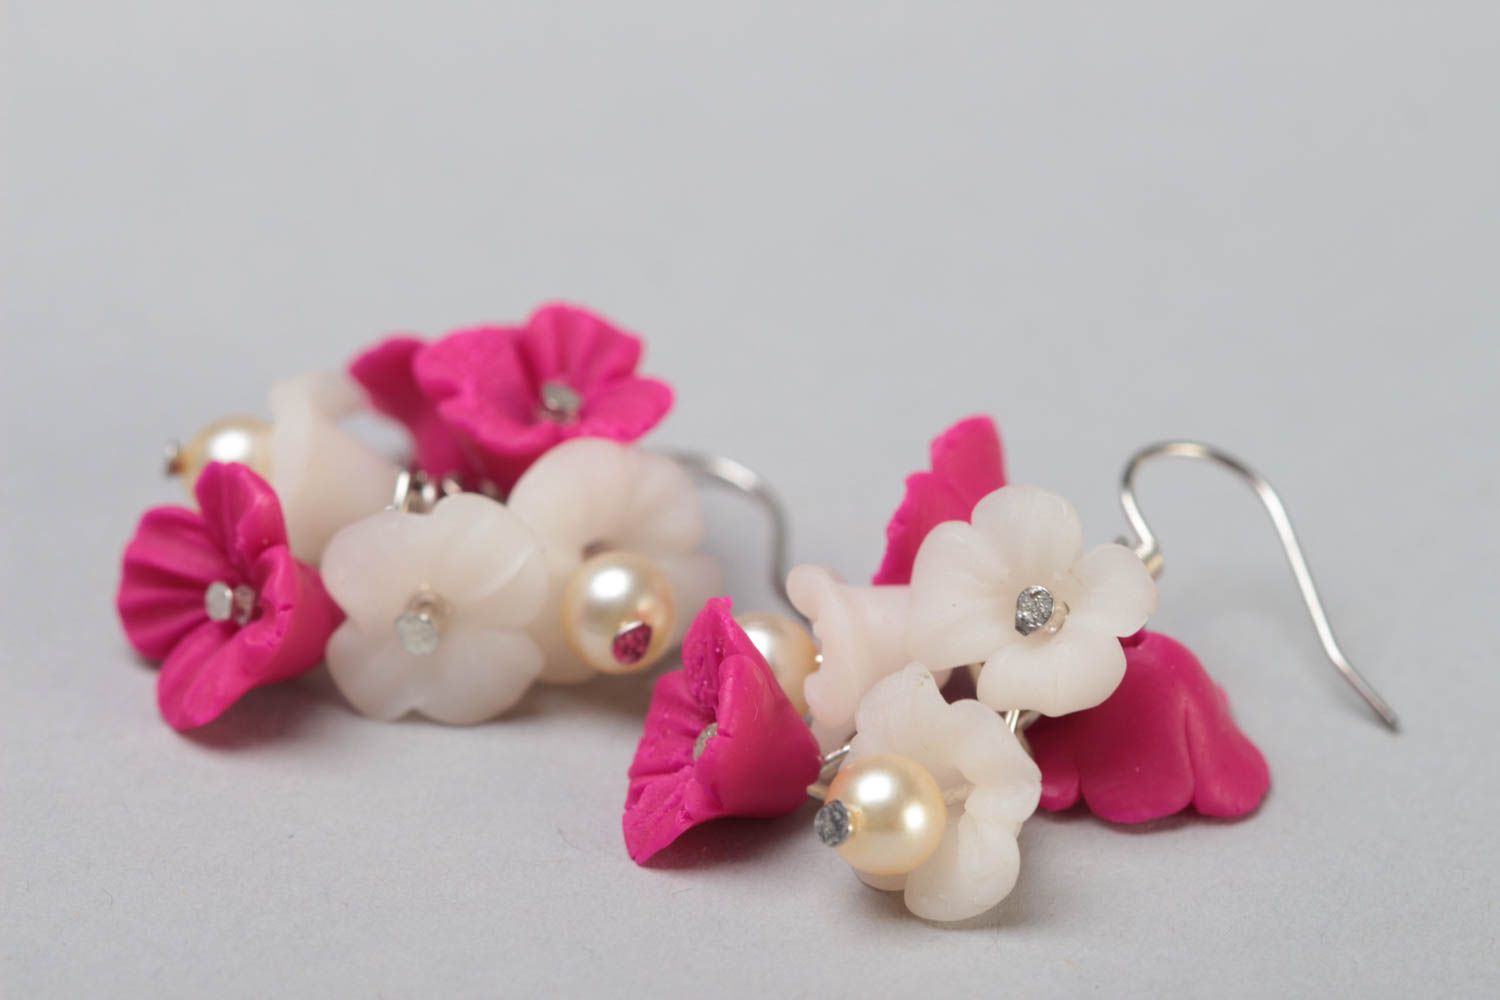 Handmade designer polymer clay floral dangling earrings in pink and milk colors photo 3